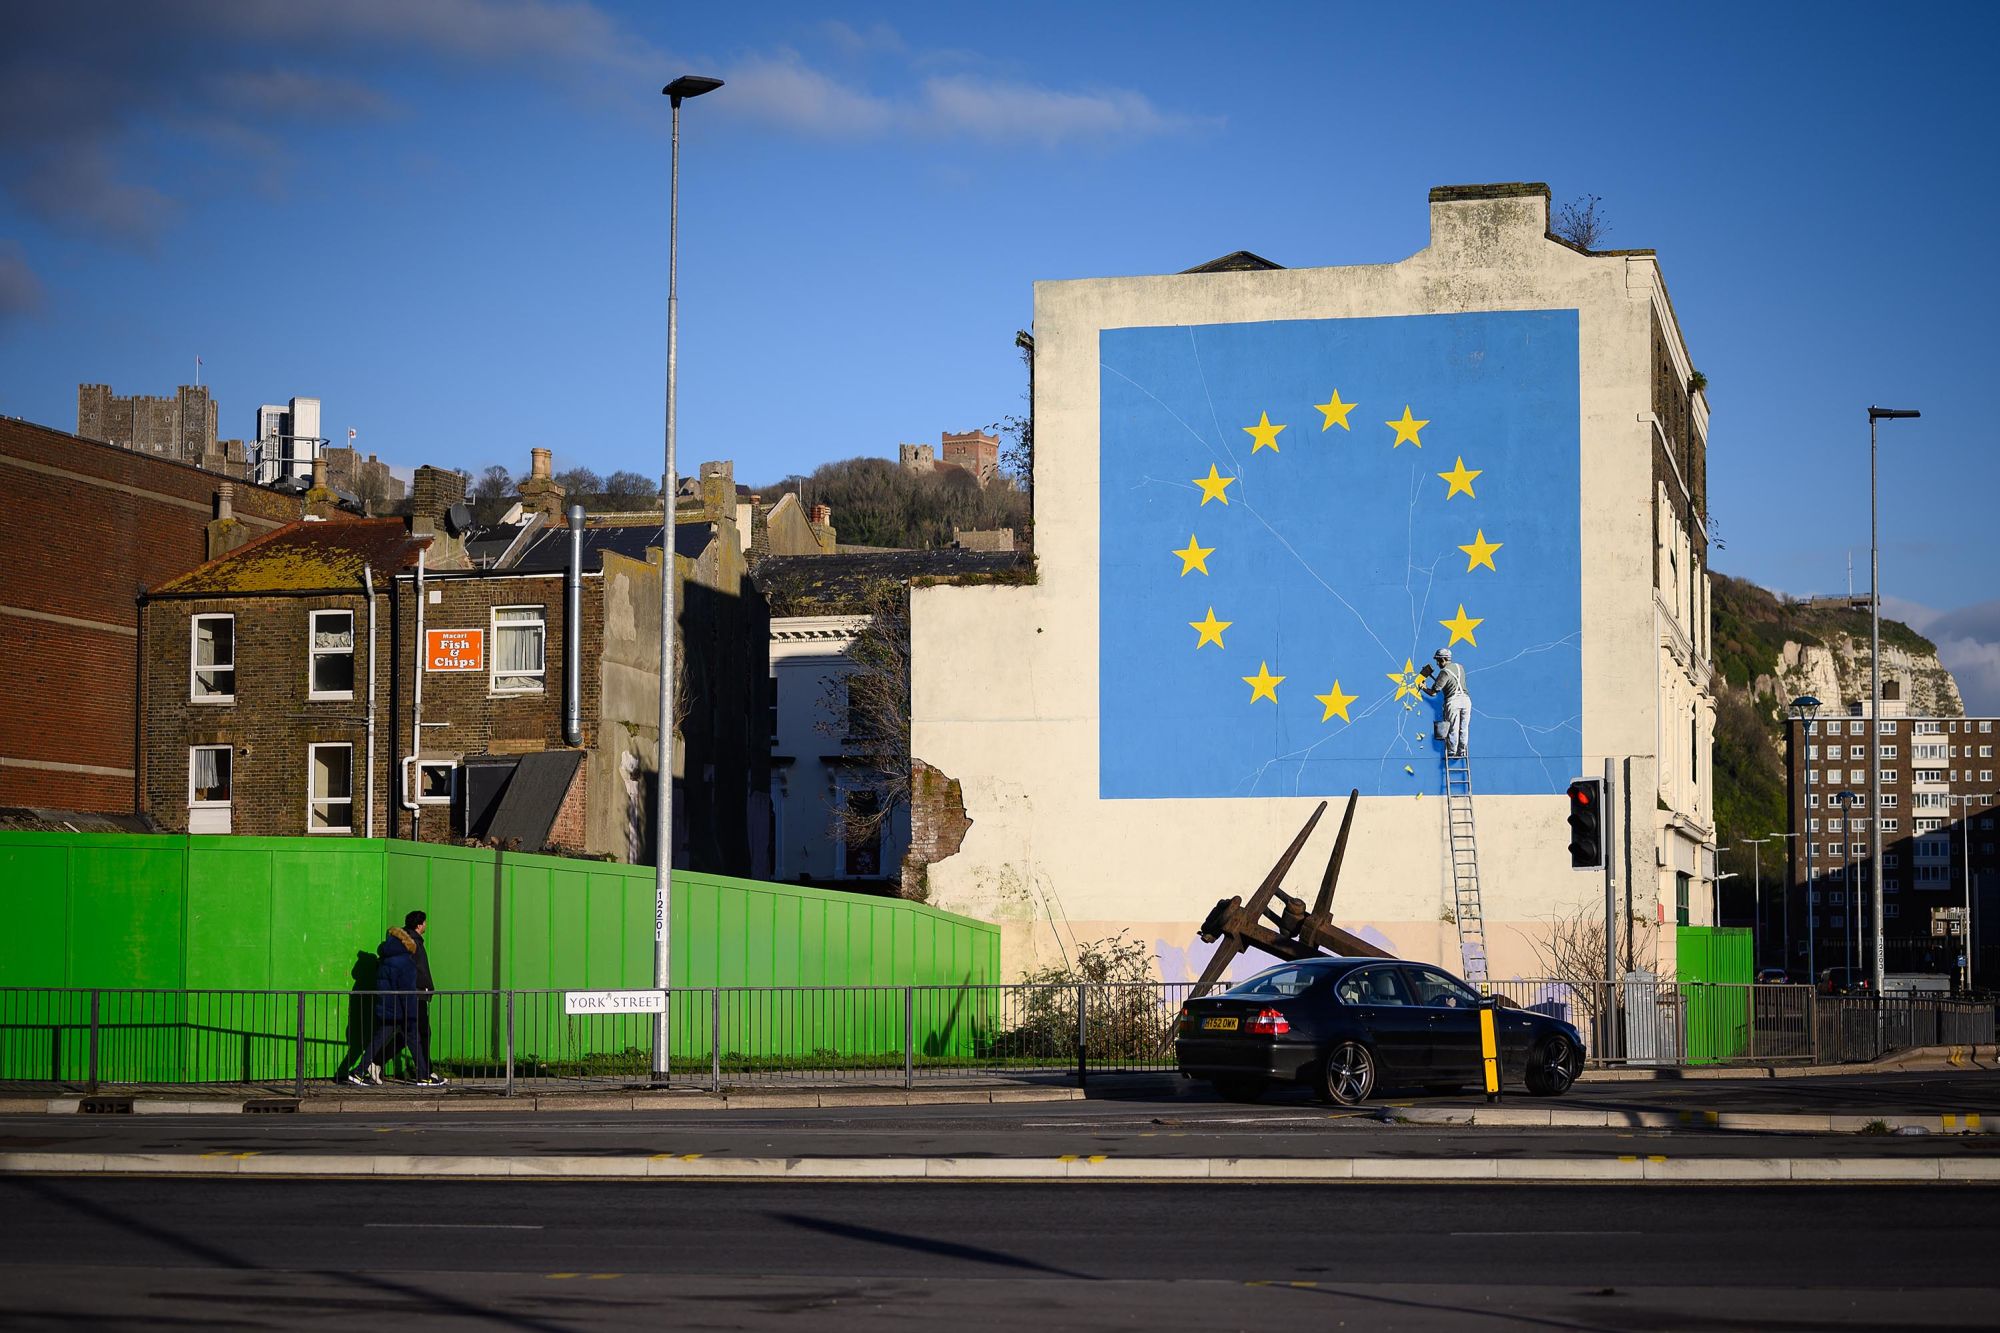 DOVER, ENGLAND - JANUARY 03: A painting depicting a workman chipping away at a star on the EU flag by artist Banksy is seen on January 03, 2019 in Dover, England. The port town of Dover, on England's south coast is the home of the famous White Cliffs, and the international gateway for the movement of passengers and trade into and from Europe. (Photo by Leon Neal/Getty Images)